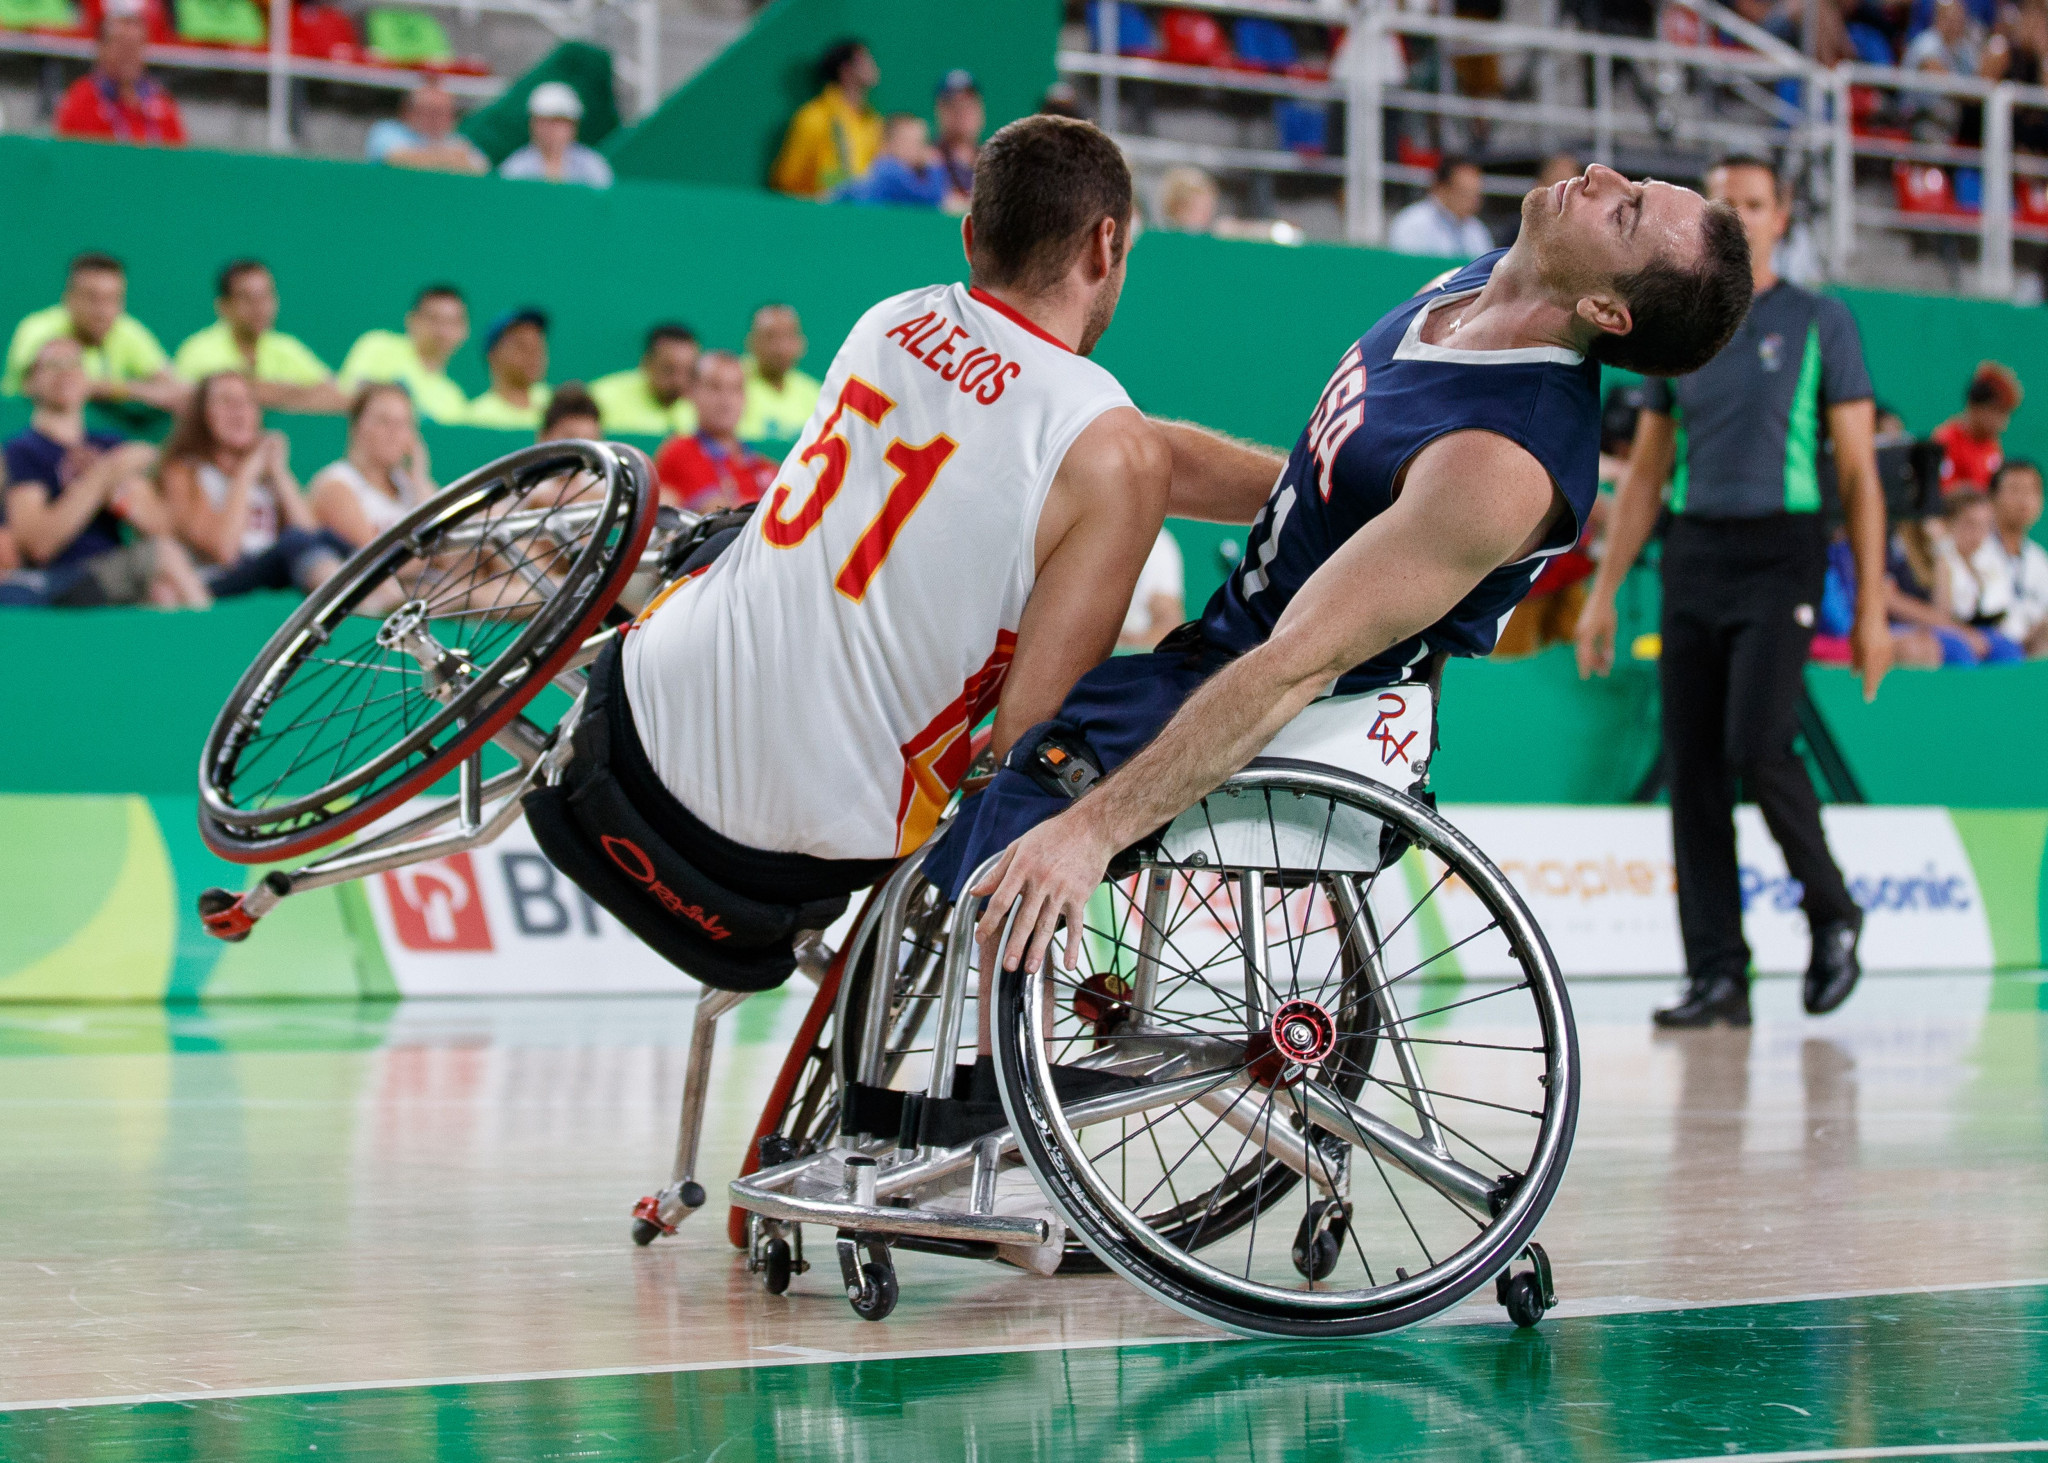 IWBF introduce repechage system for Paralympic and World Championship qualification